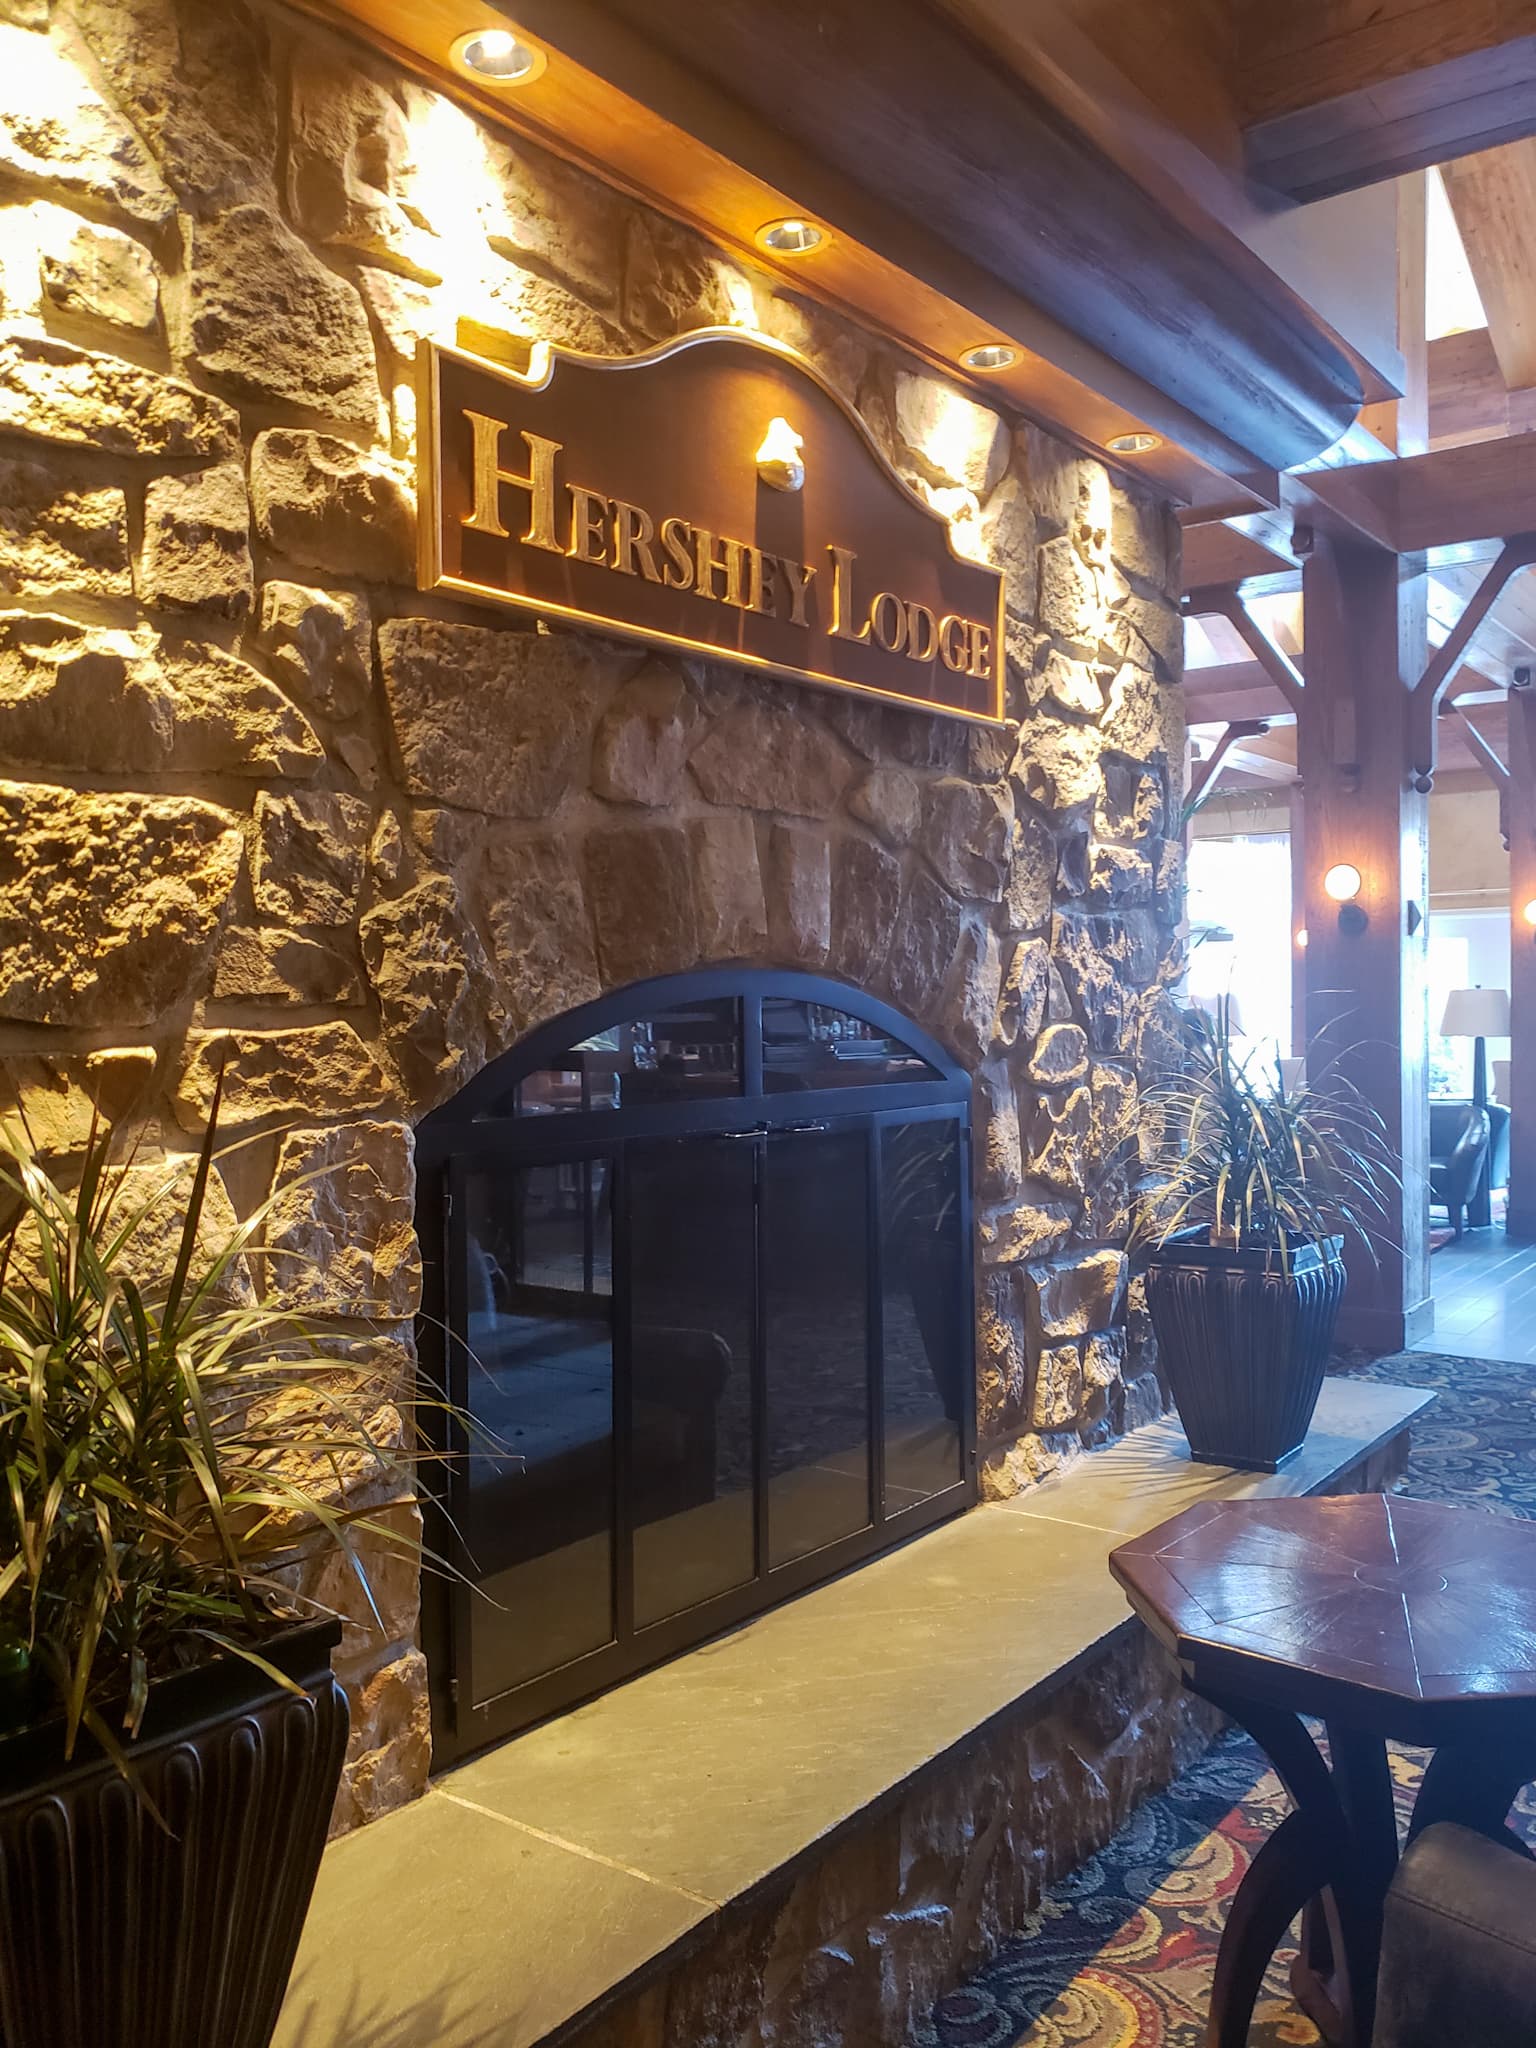 Places to Stay Near Hershey Park: Hershey Lodge Review